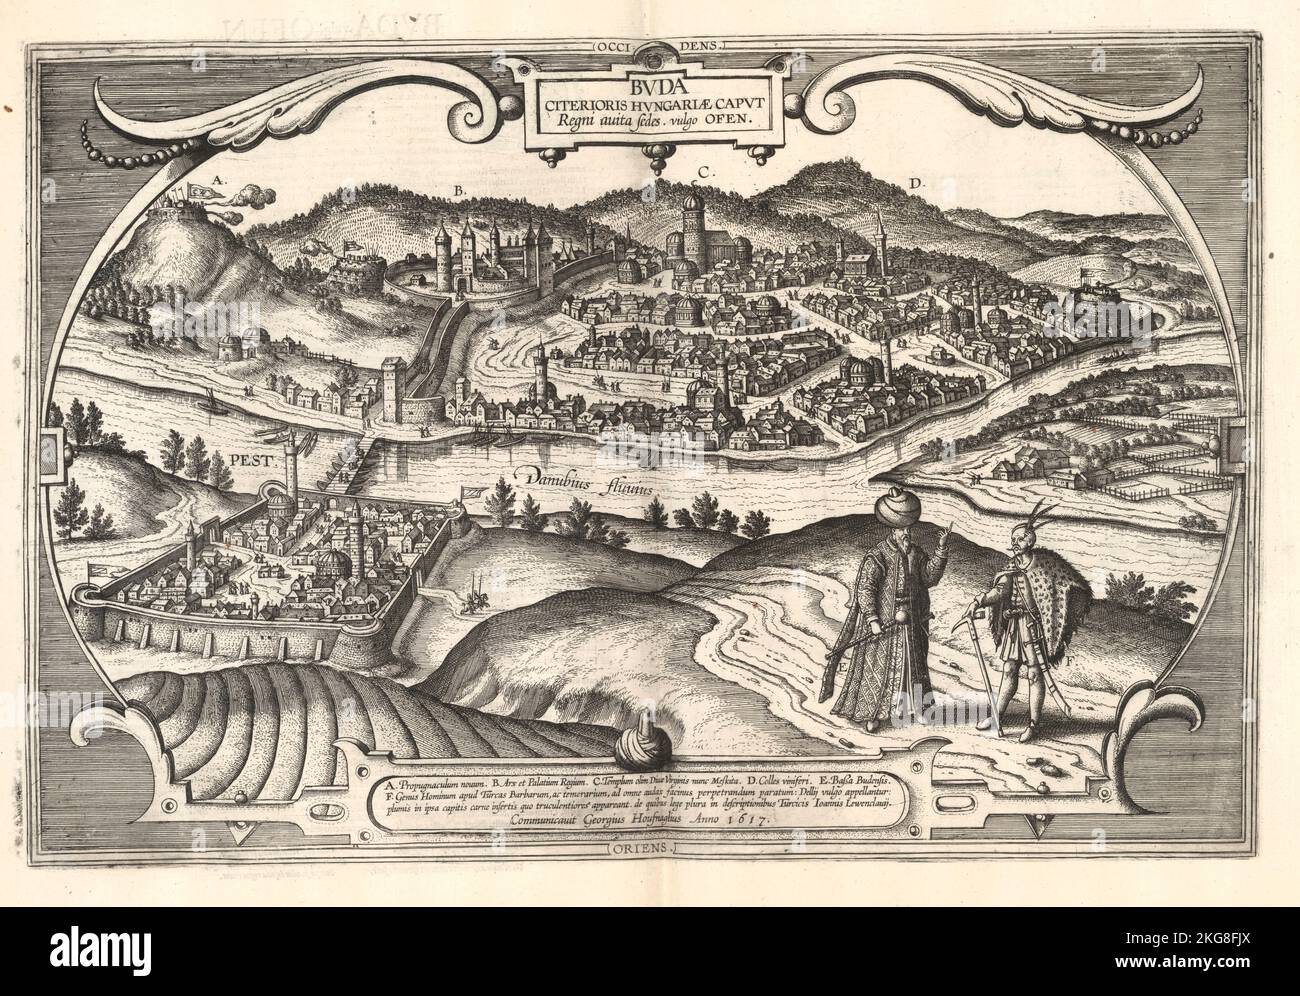 Engraved Cityscape of Buda (Budapest) from the Civitates Orbis Terrarum Published in 1600 by Braun, Georg, 1541-1622; Hogenberg, Franz, 1539-1590; Stock Photo